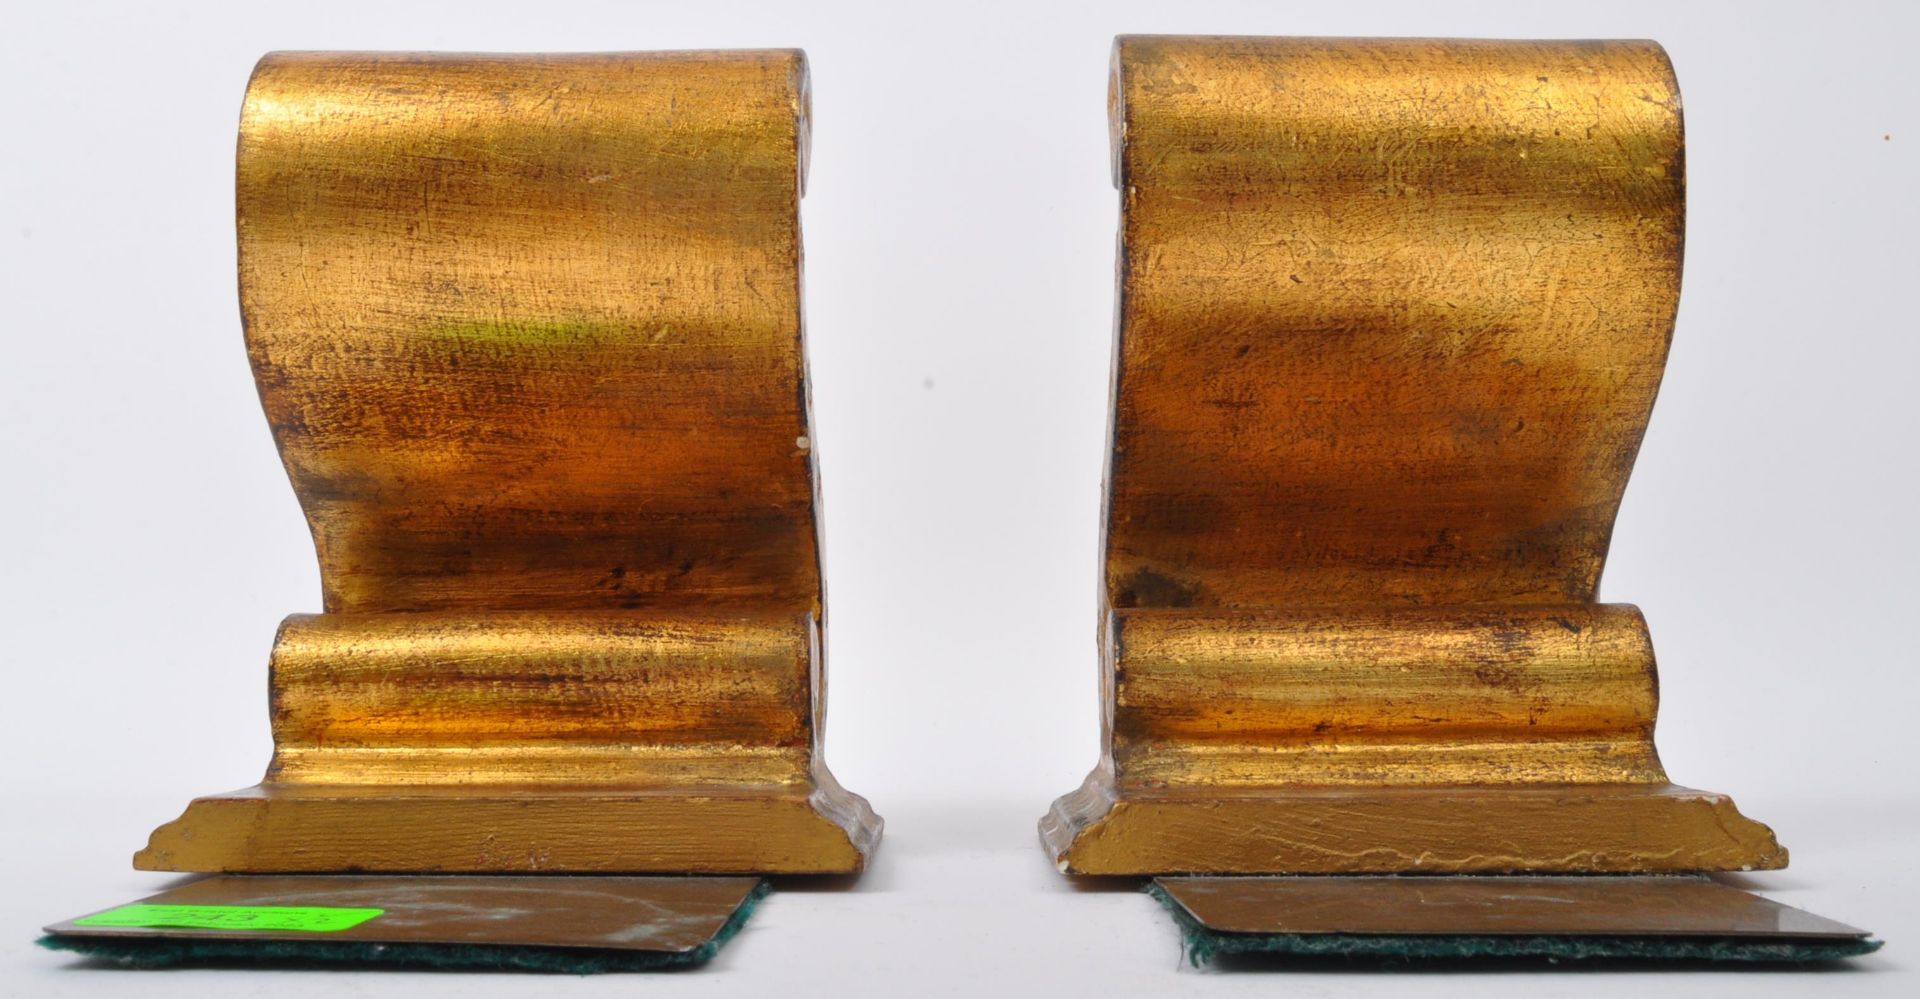 PAIR OF VINTAGE ITALIAN GILDED BOOKDENDS - Image 5 of 5